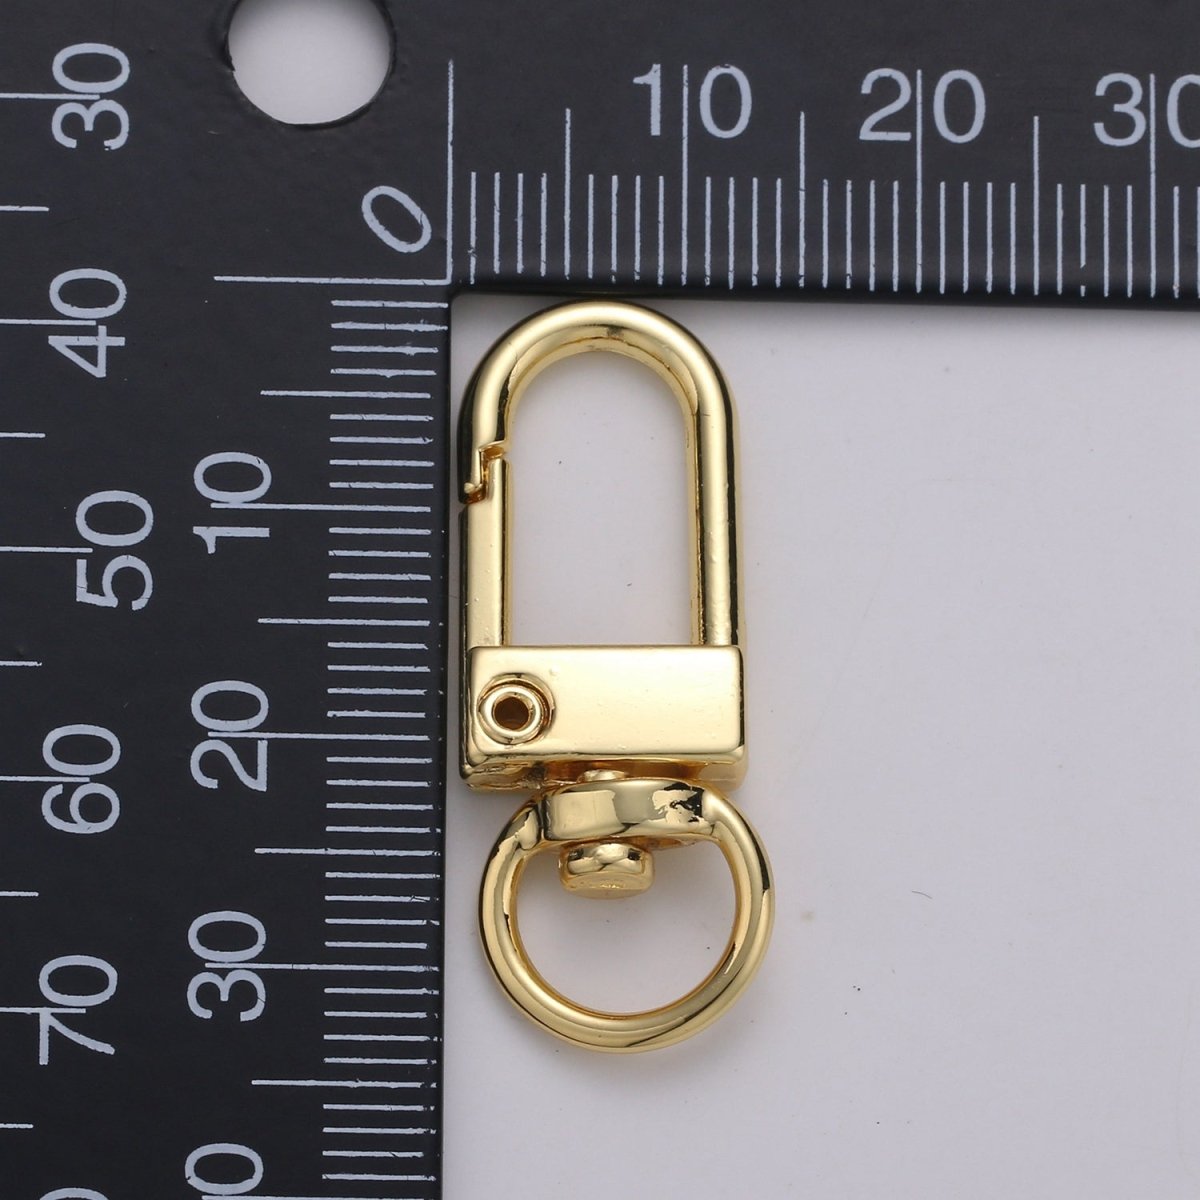 Dainty Self Closing Swivel Clasps - Triggerless - 33mm X 12mm - Real Gold Plated for Charm Lock Keychain Supply Component L-022 L-023 - DLUXCA